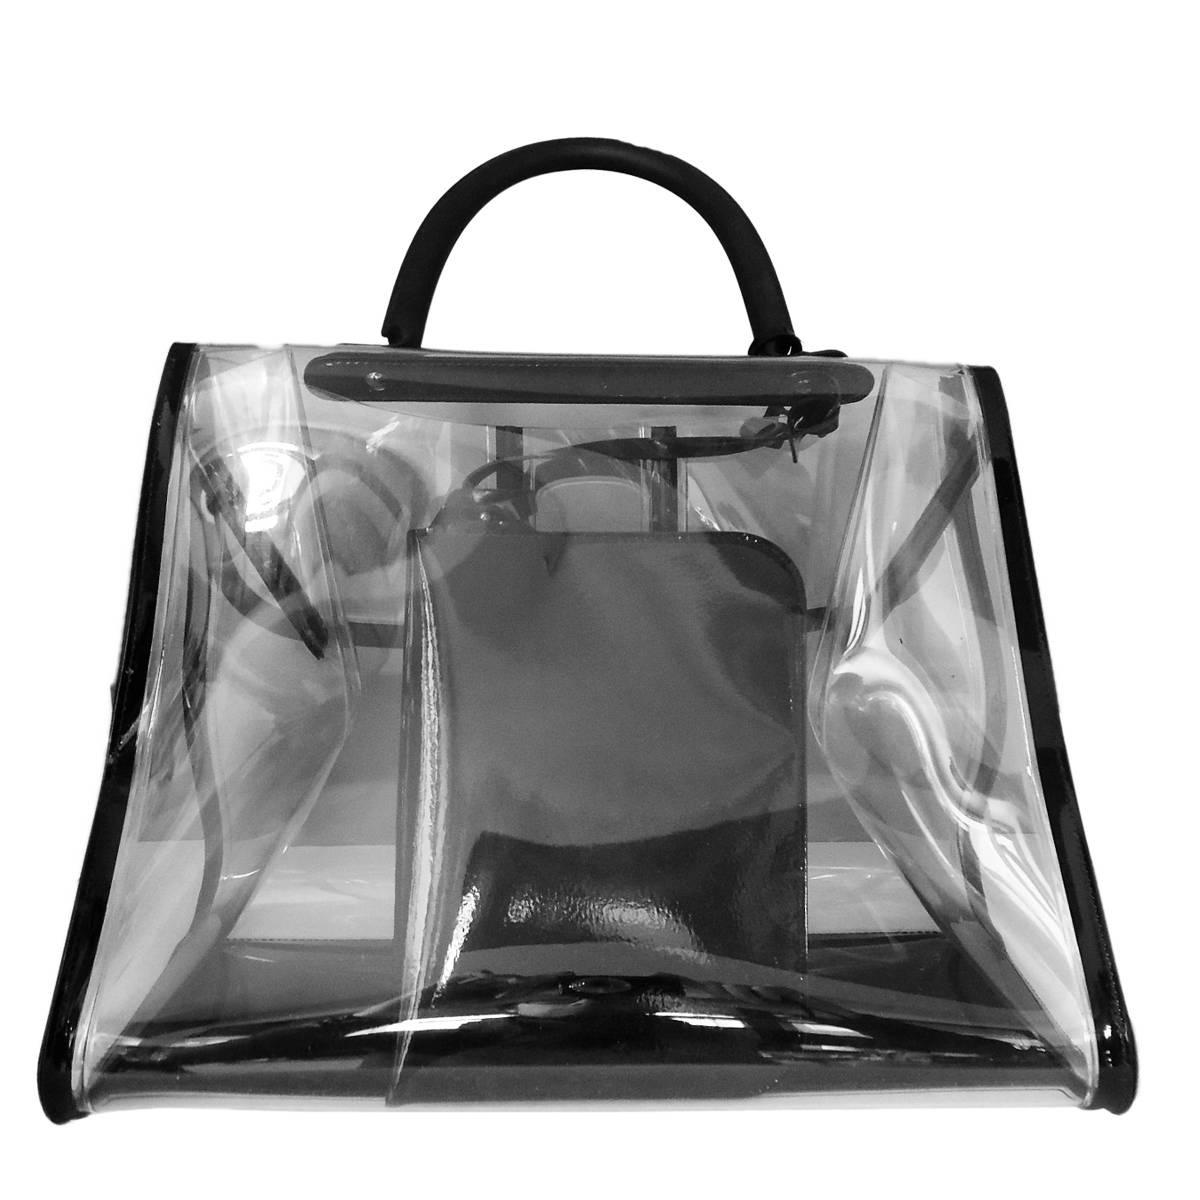 So unique and very refined Delvaux tote bag
 Brillant GM Transparent PVC
Vynil
Unique handle
Internal envelope bag
Cm 35 x 27 x 18 (13.7 x 10.6 x 7 inches)
Made in Italy
Worldwide express shipping included in the price !